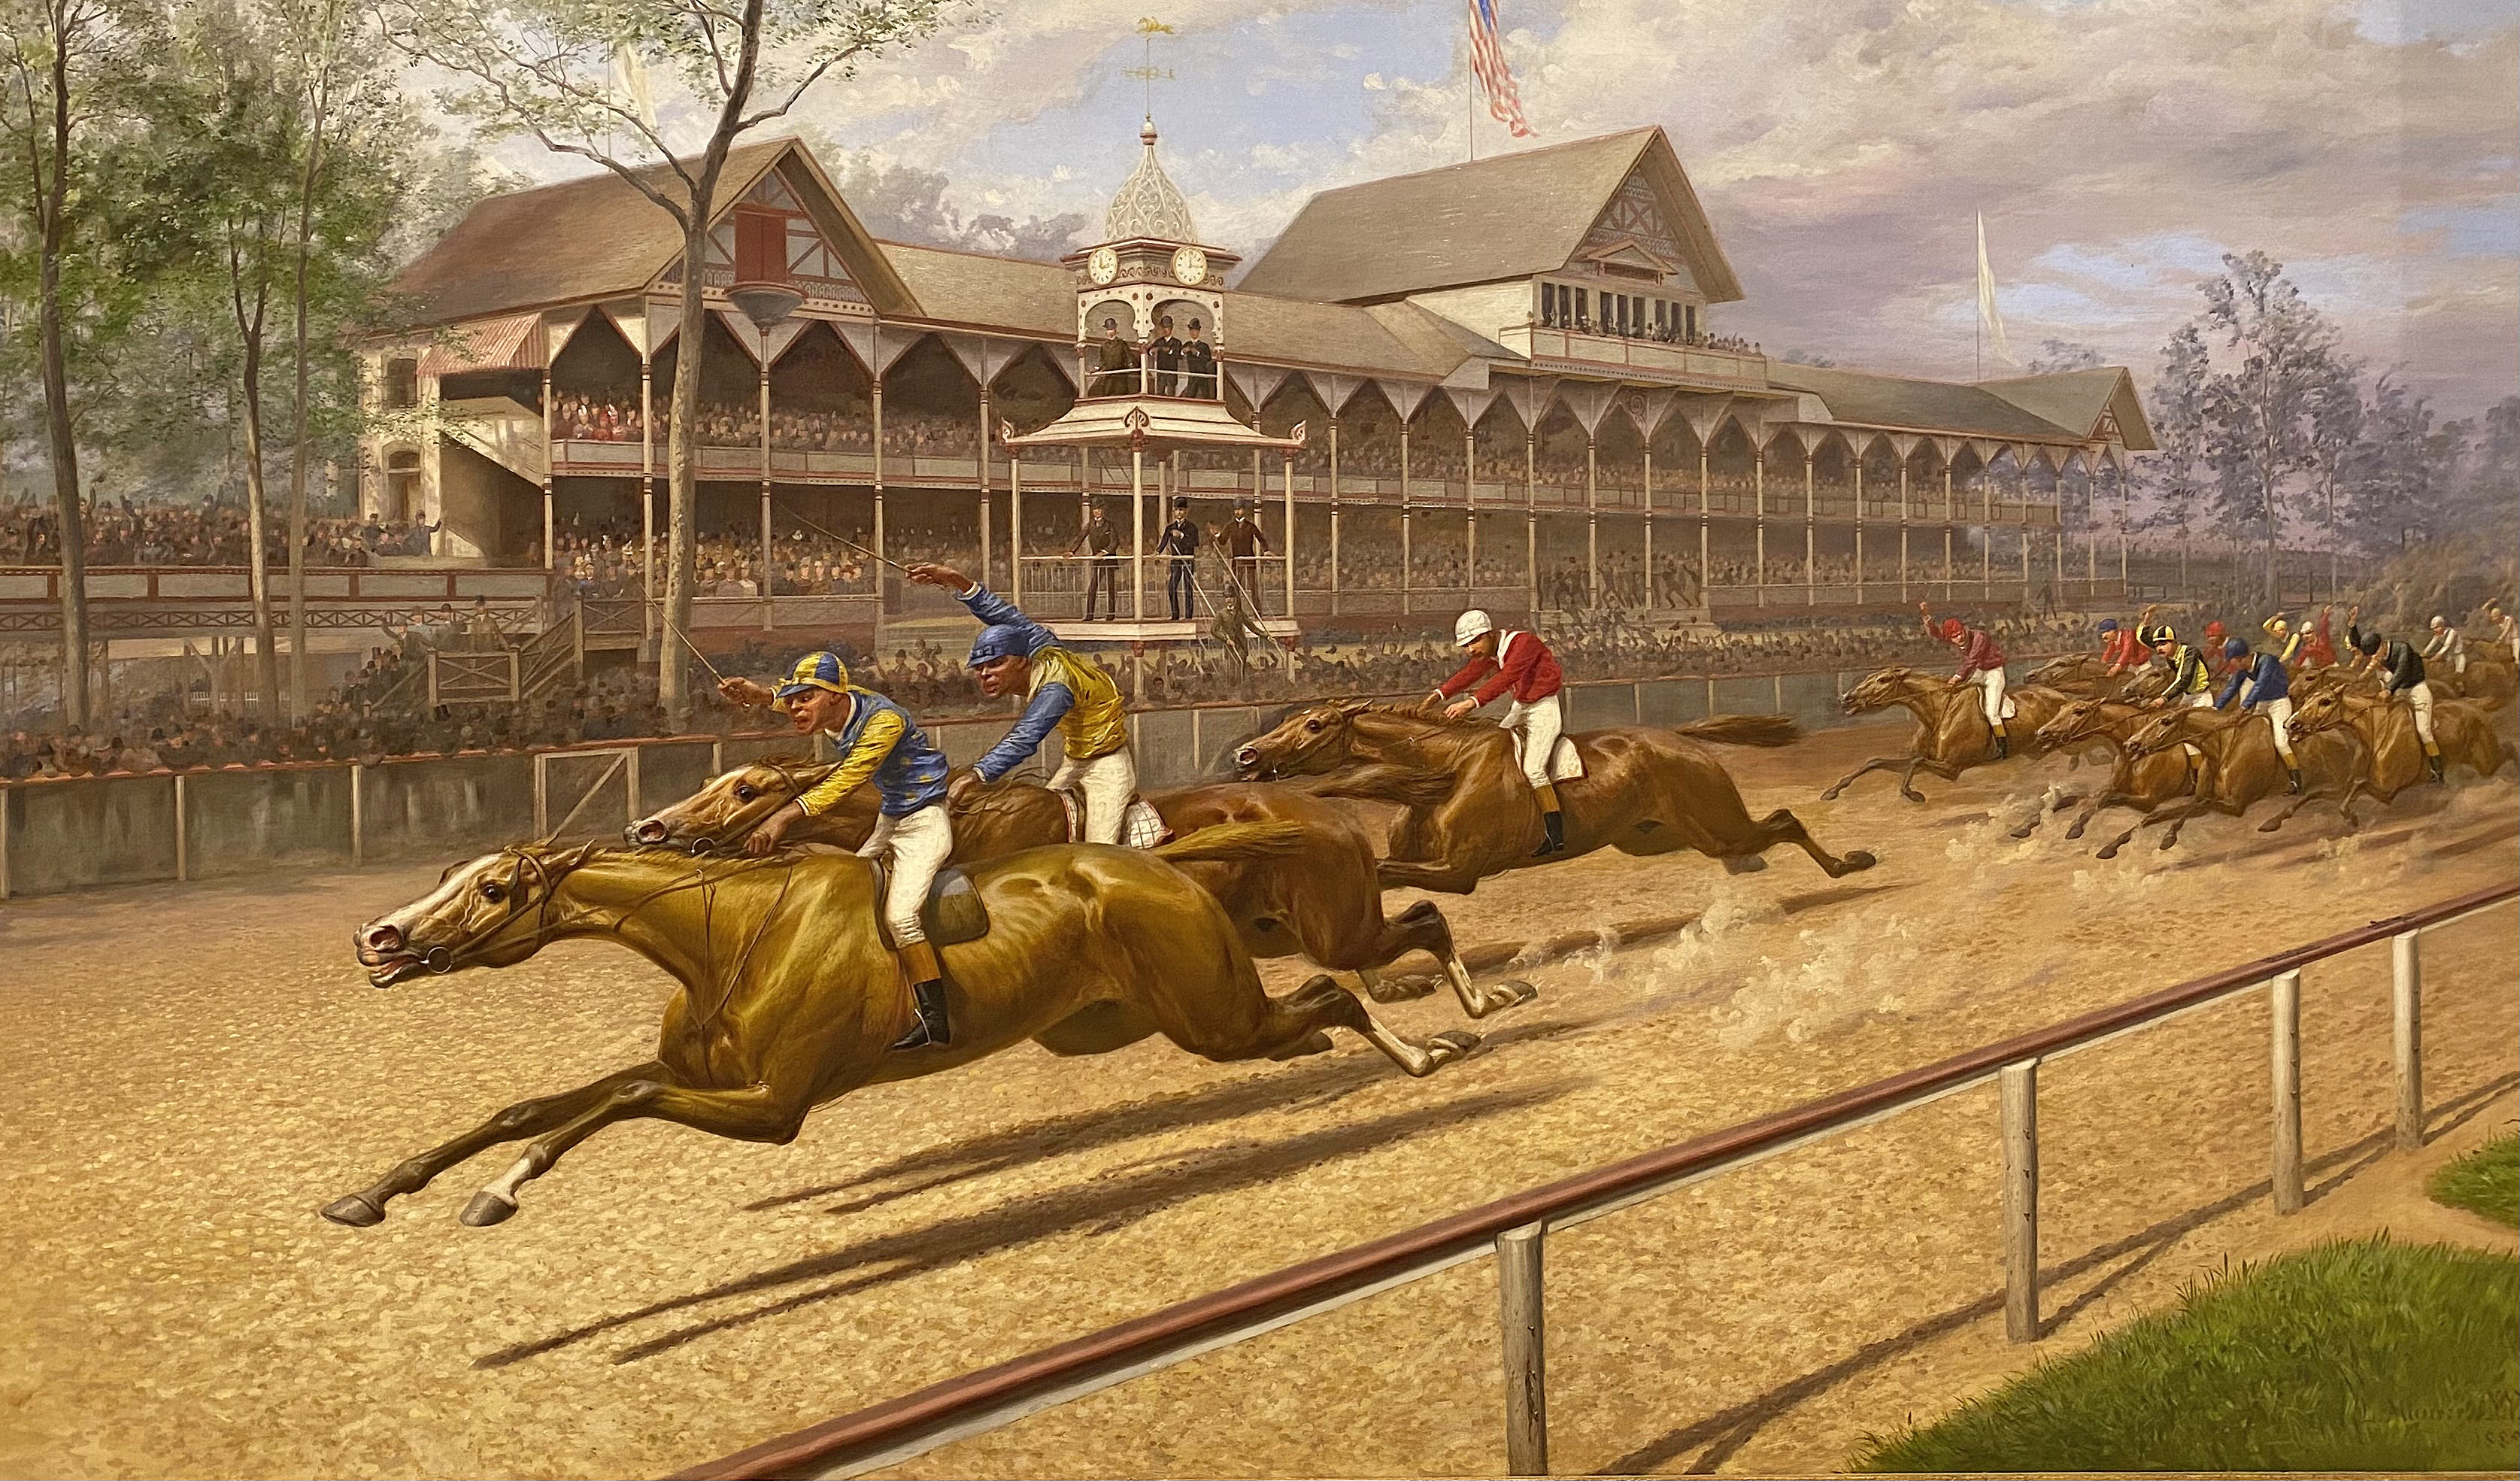 First Futurity by L. Maurer, 1889: Proctor Knott with Shelby "Pike" Barnes in front winning the race (Museum Collection)